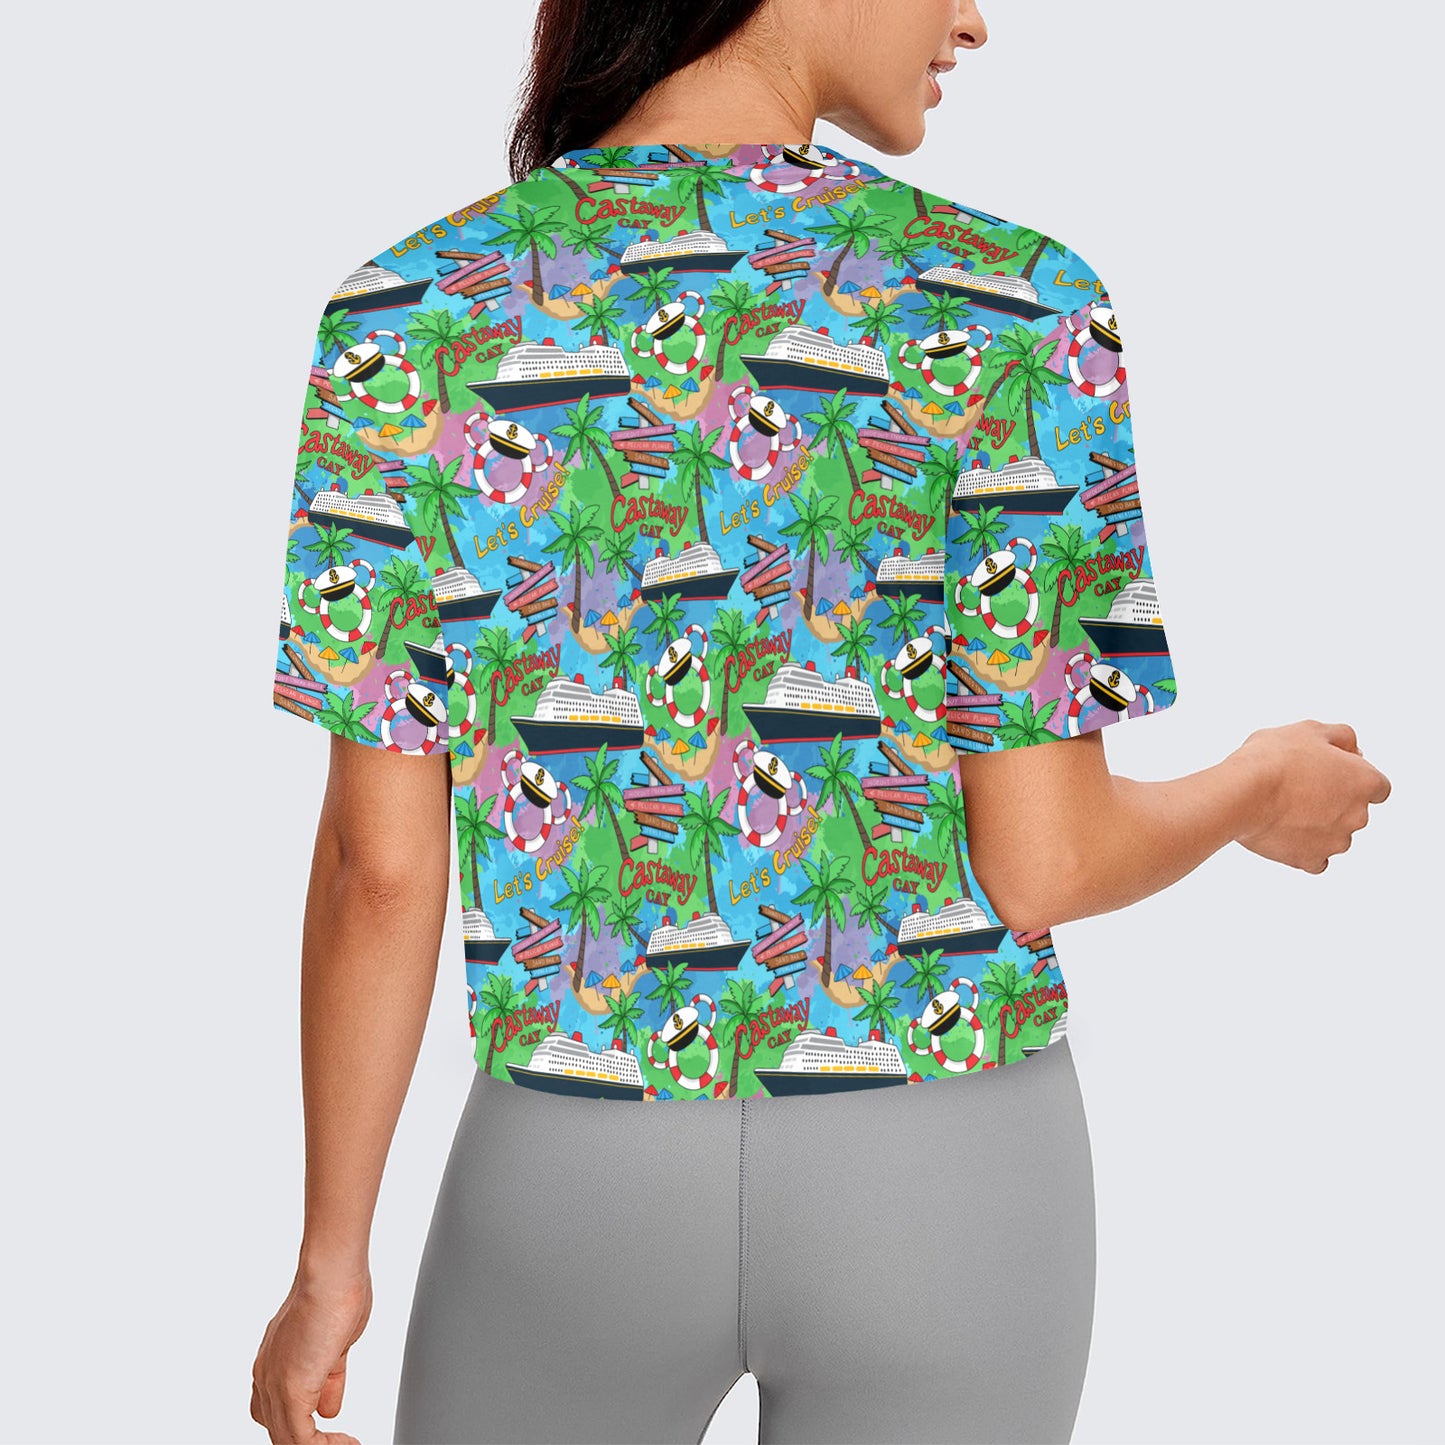 Let's Cruise Women's Cropped T-shirt